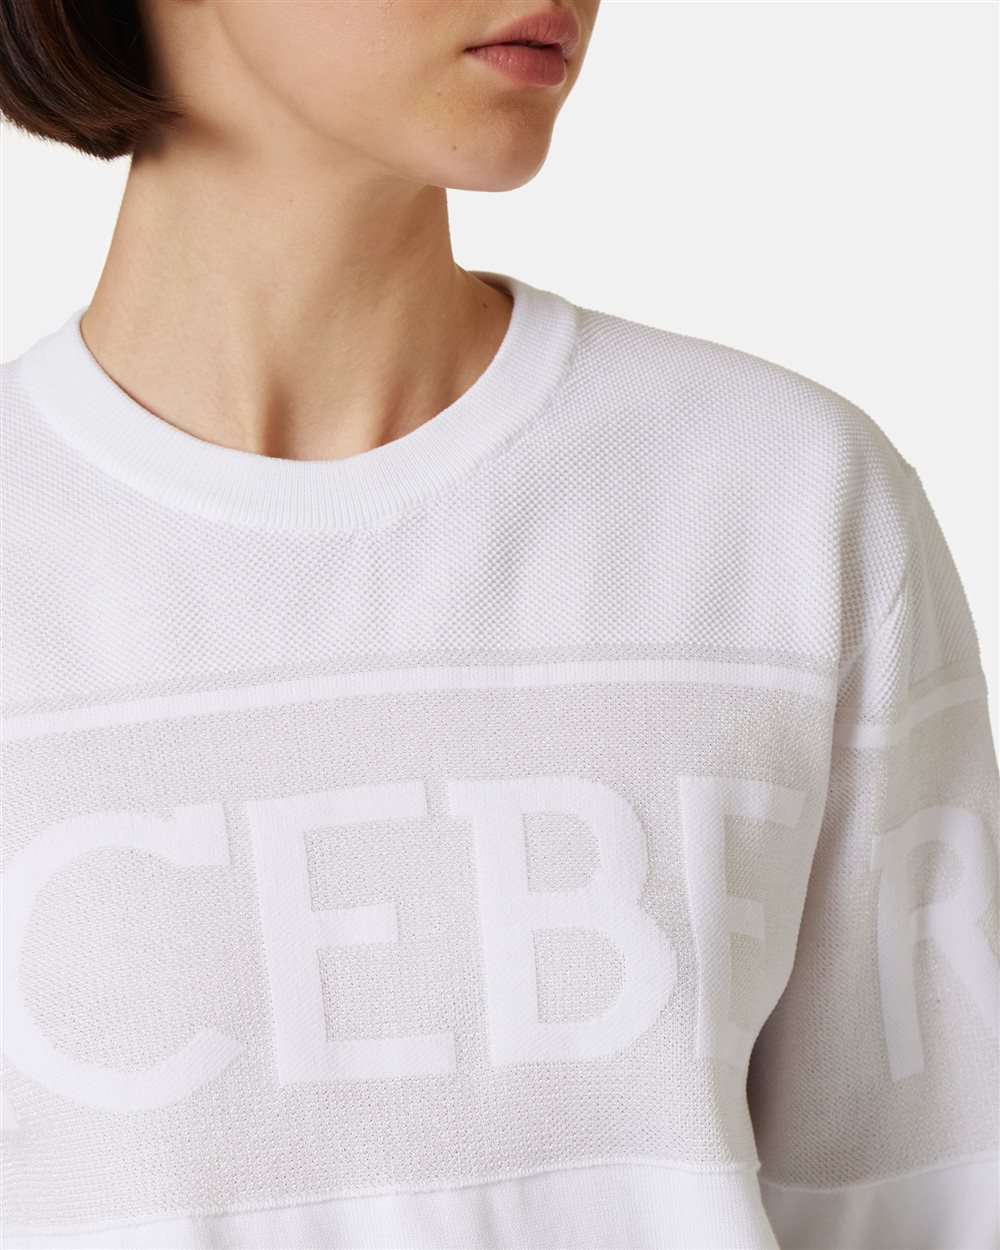 Cotton sweater with logo - Iceberg - Official Website